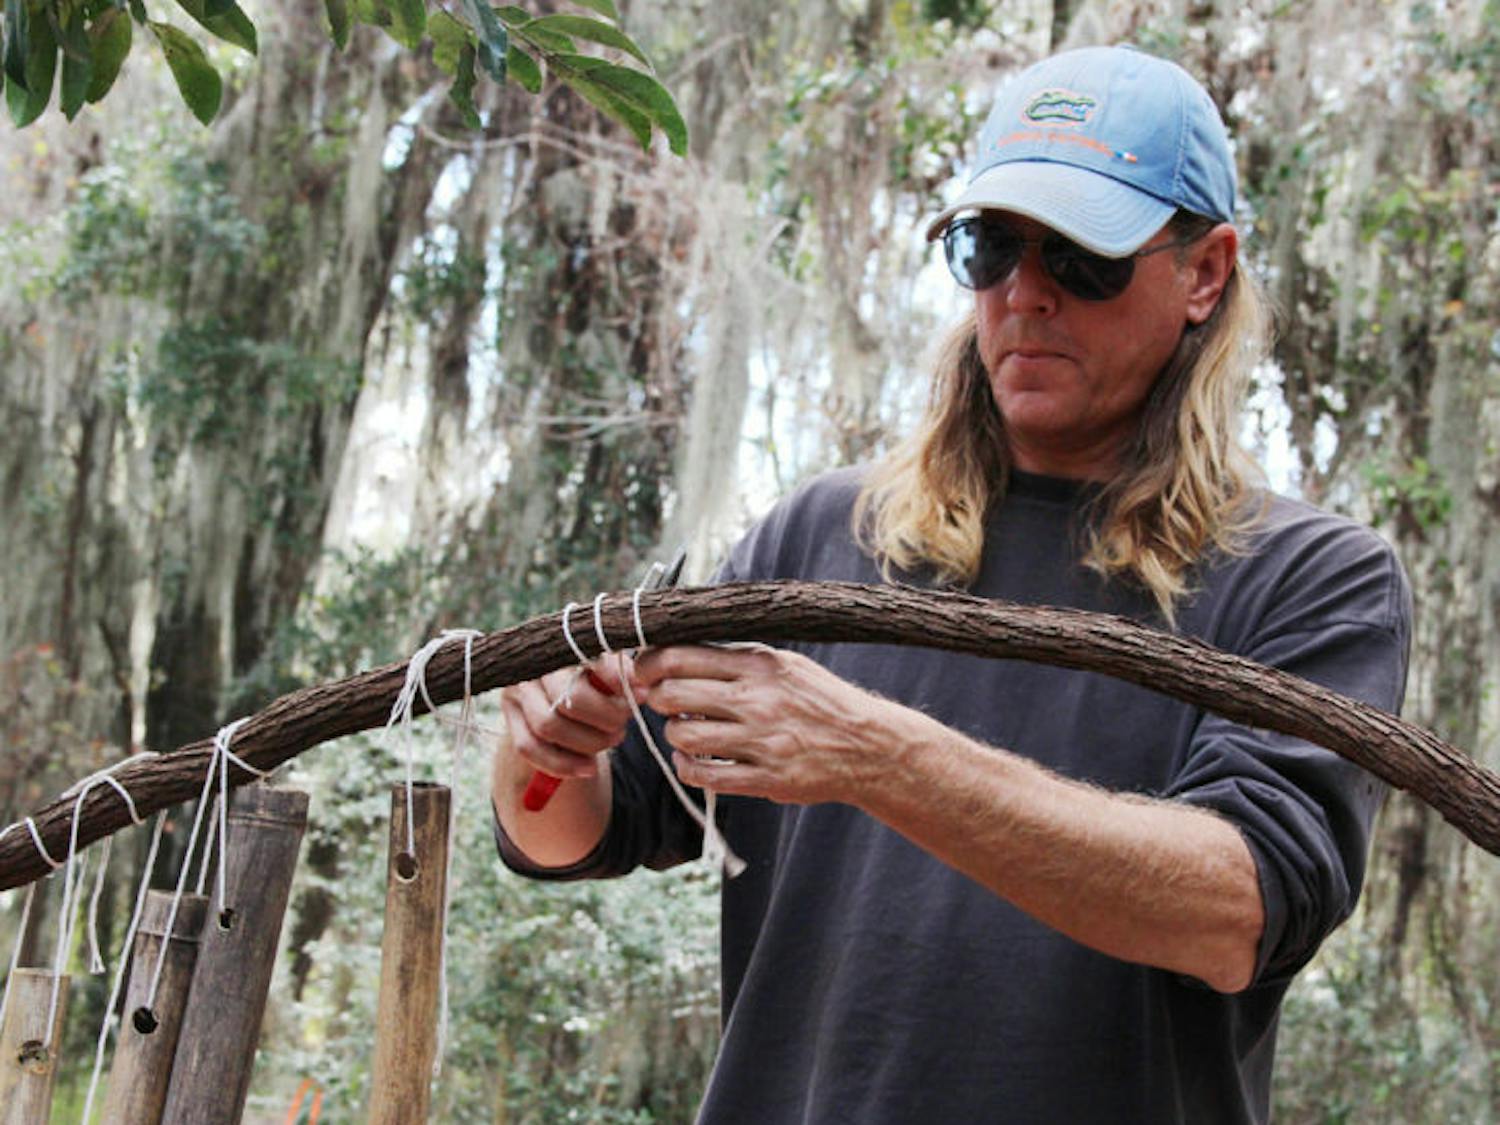 UF greenhouse manager Jeff Hubbard helps dismantle artist Jon Anderson’s “Bambooville” on Tuesday. The university requested Monday that the site be cleared within 72 hours.